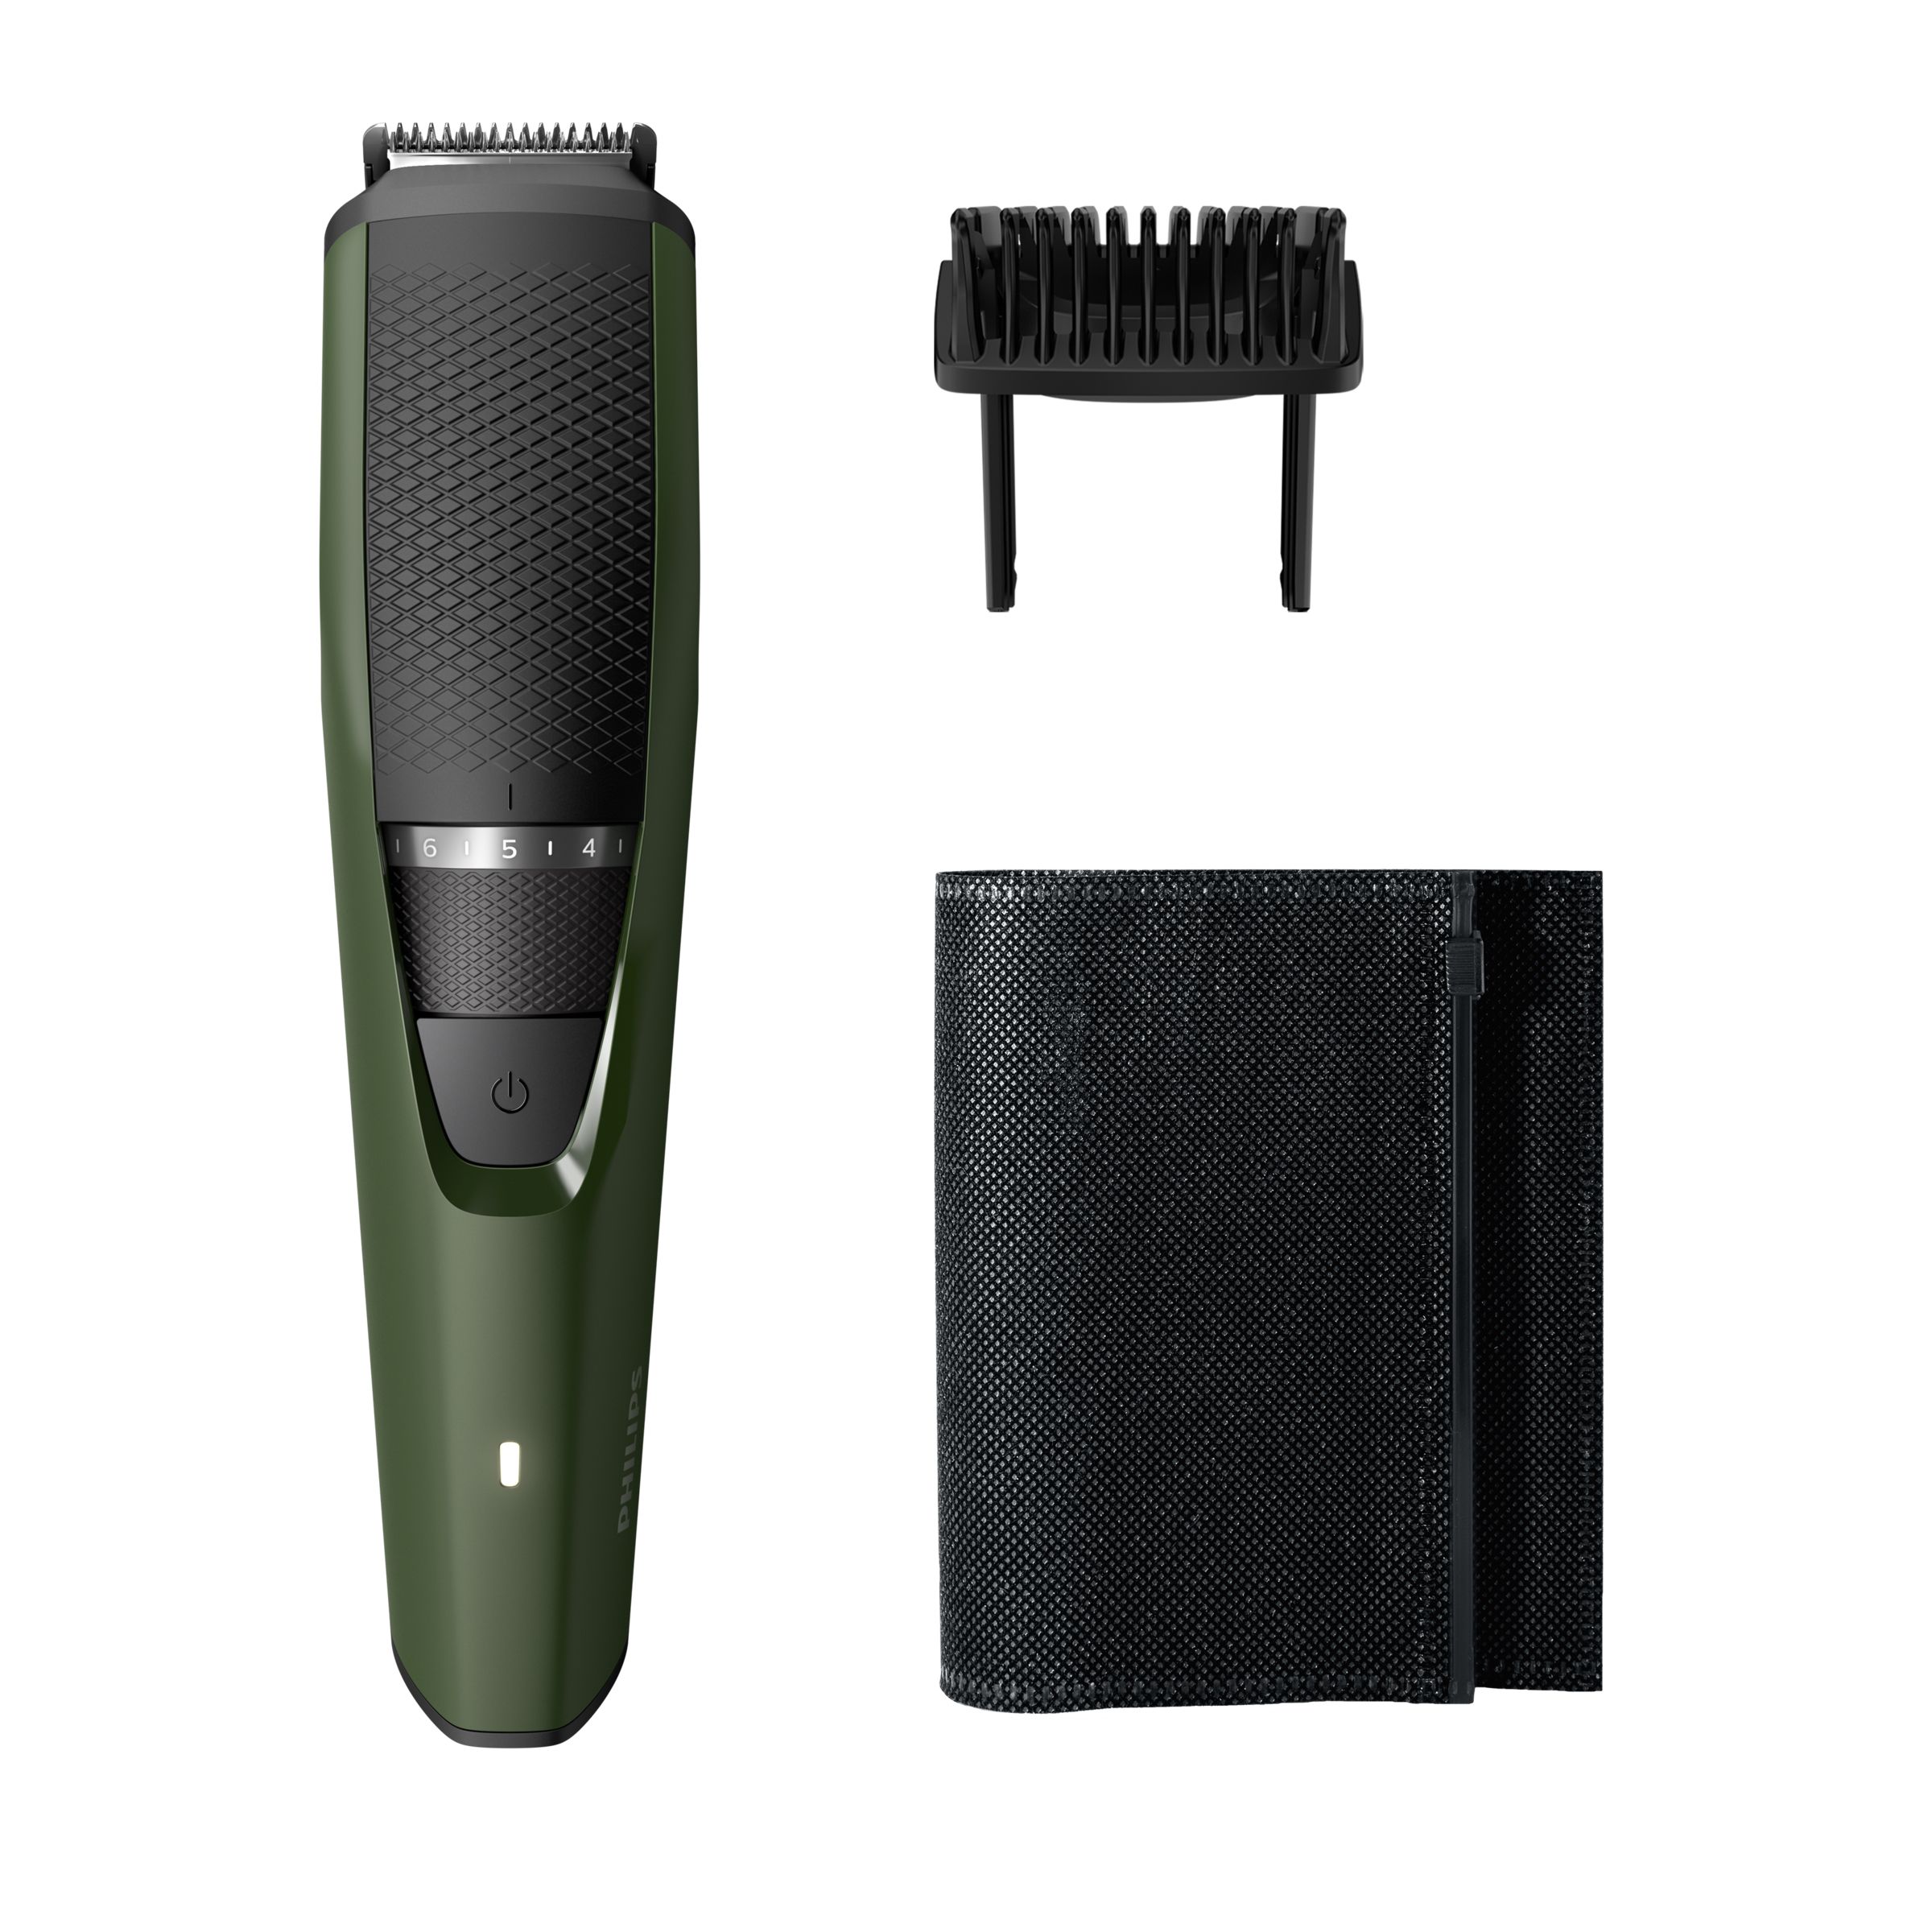 philips 3211 trimmer buy